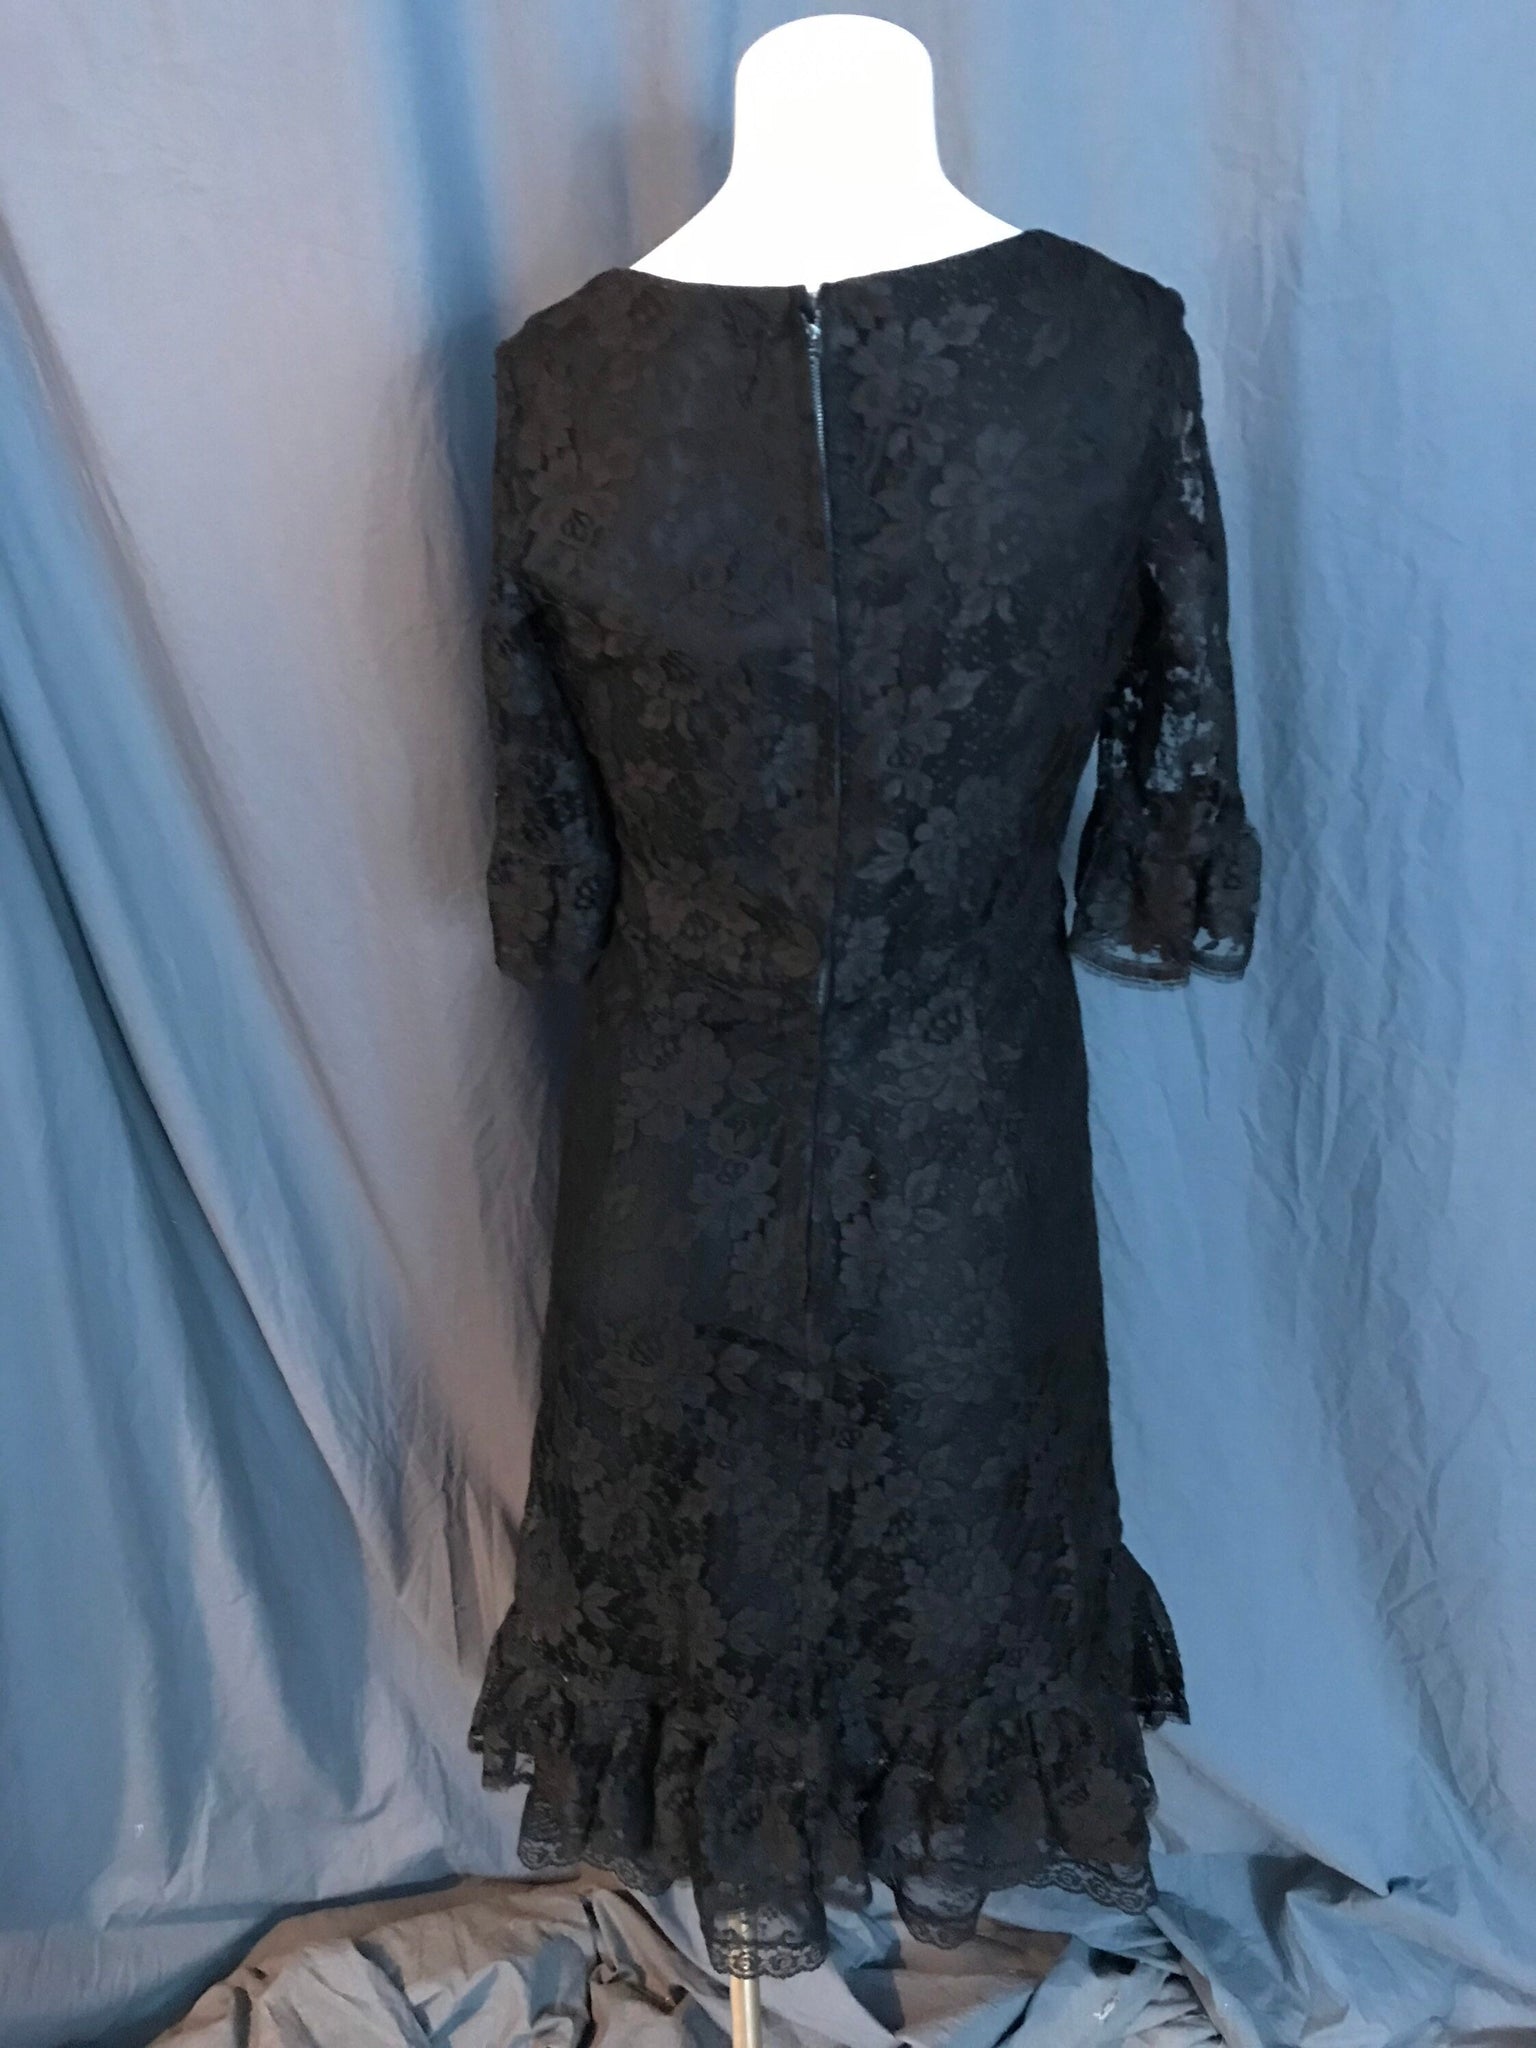 Vintage 1960’s Dress by Wendy black lace fitted dress S